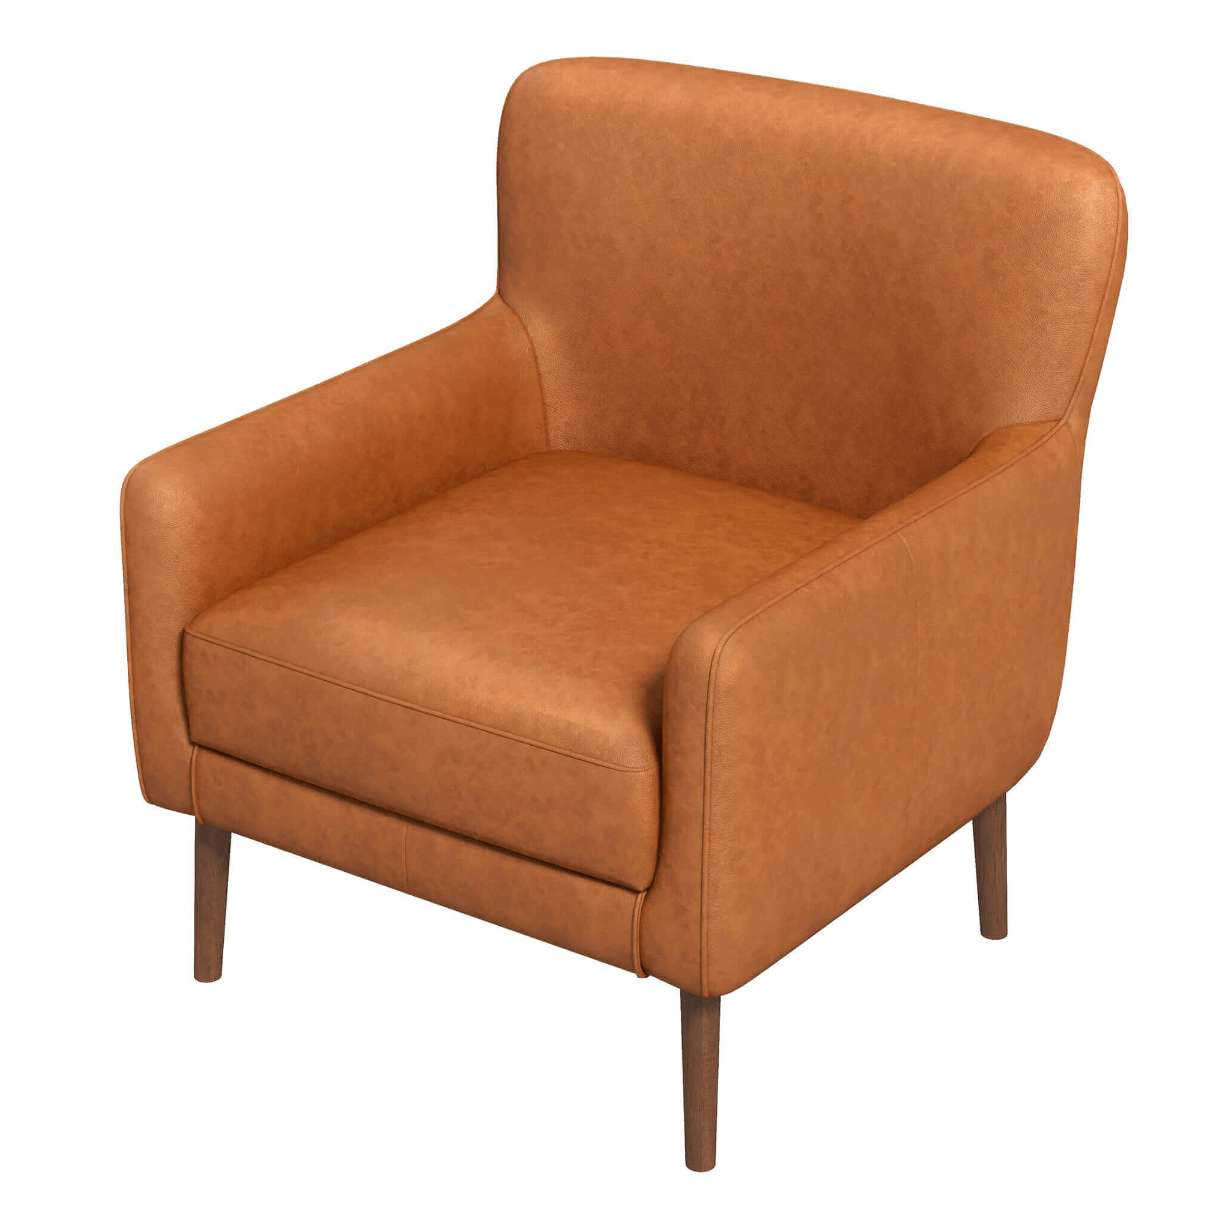 Claire MCM Style Genuine Leather Lounge Chair - Revel Sofa 